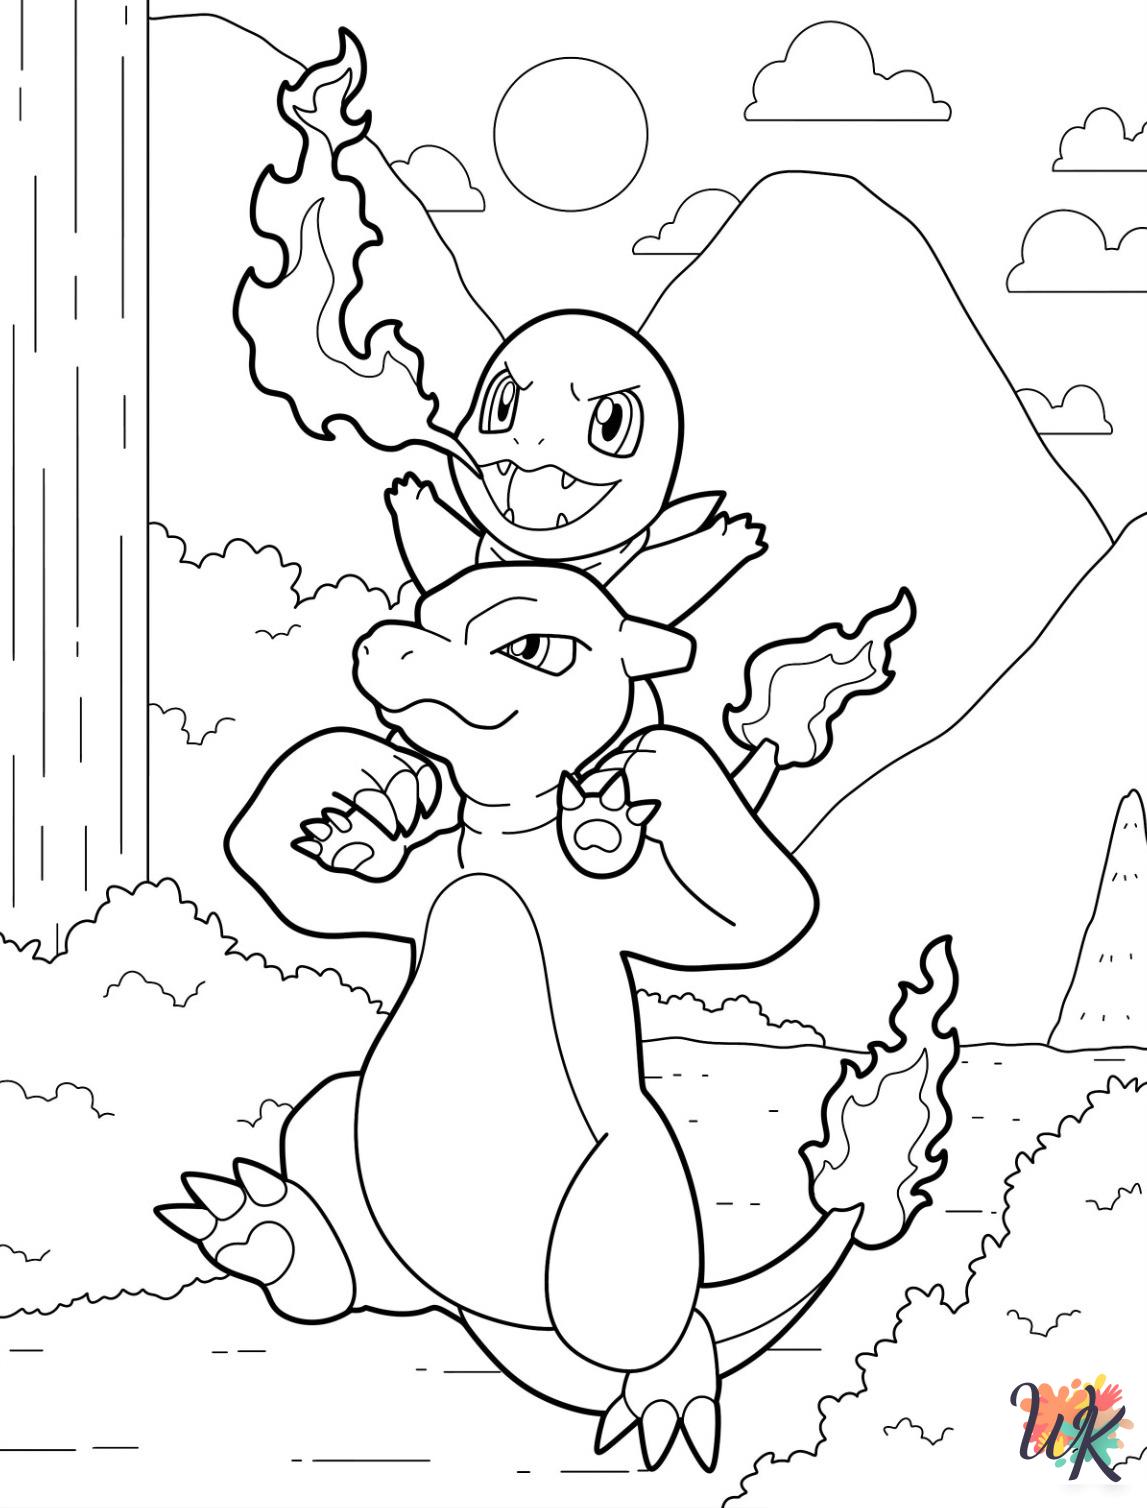 Charmander coloring pages for kids